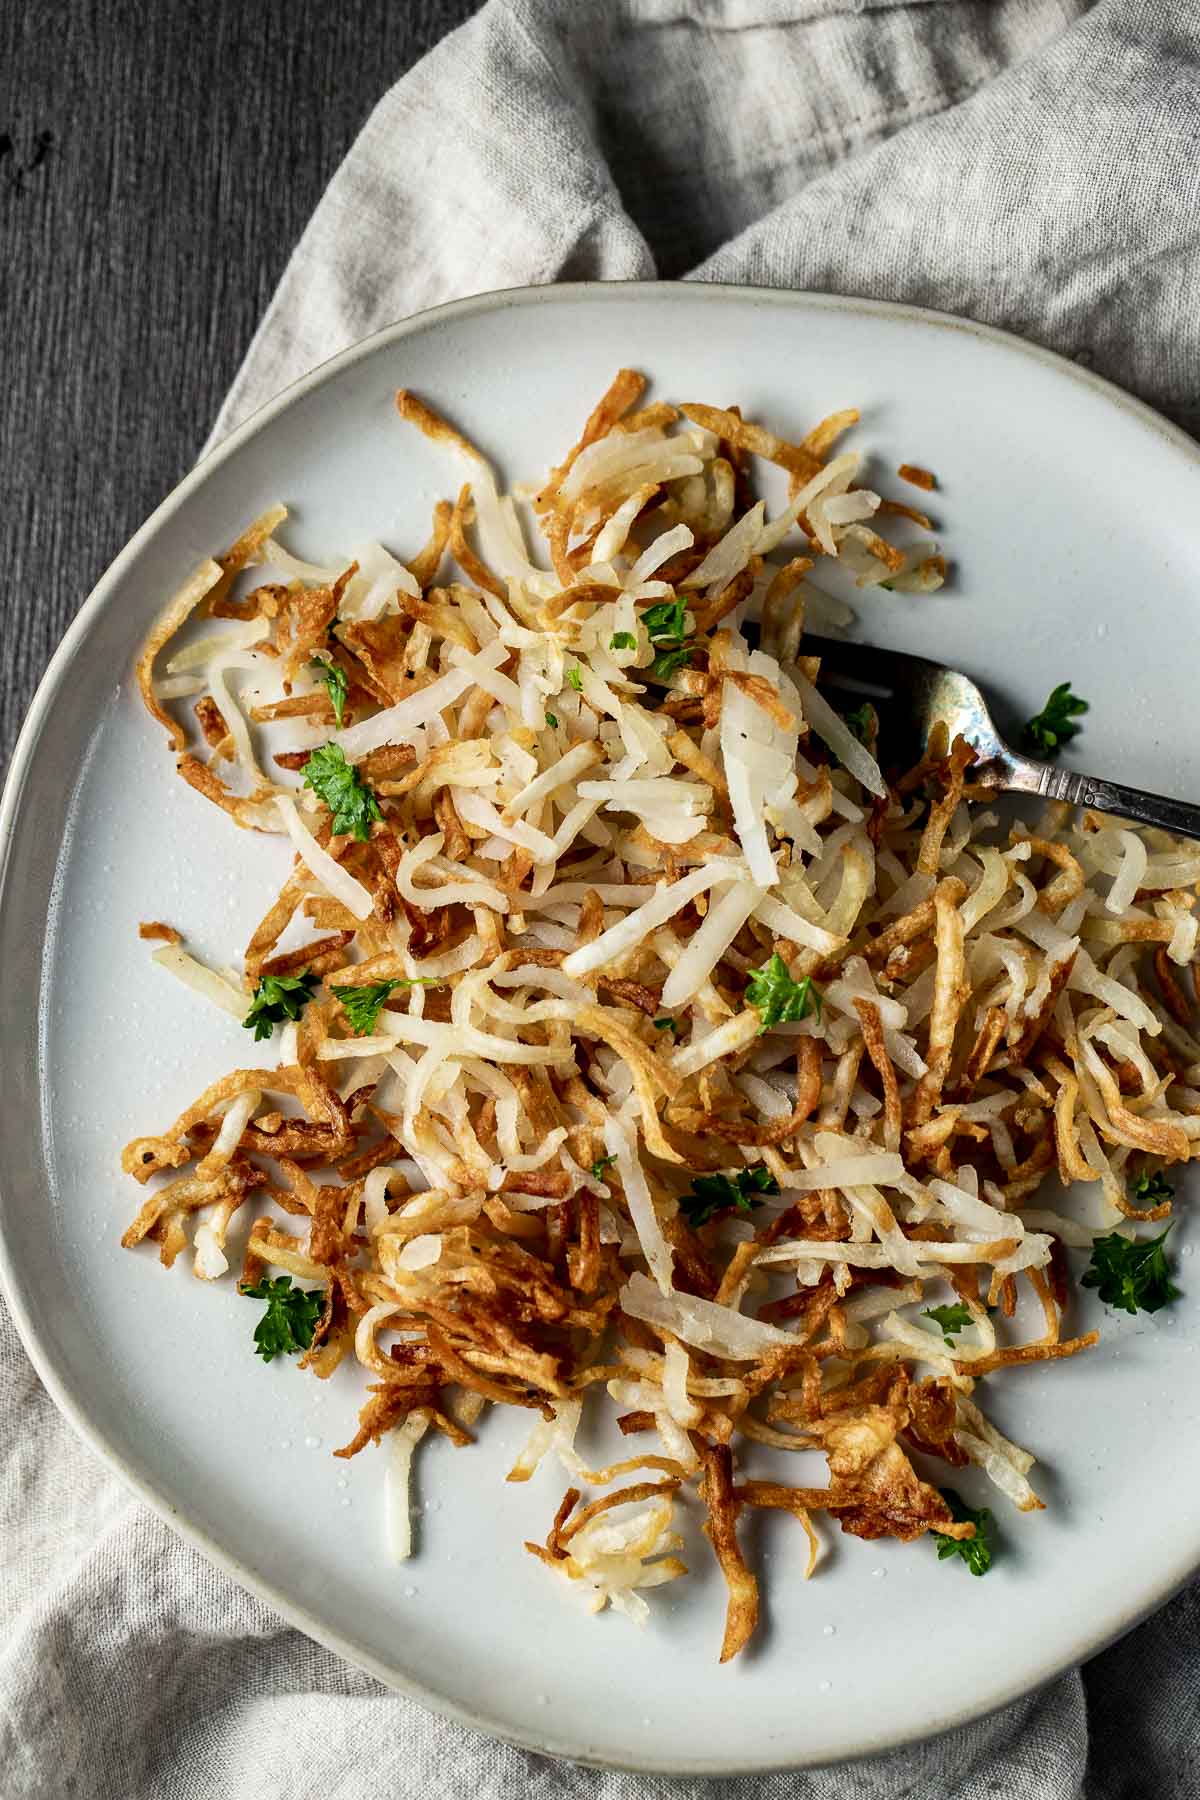 https://www.wenthere8this.com/wp-content/uploads/2022/05/air-fryer-hash-browns-4.jpg